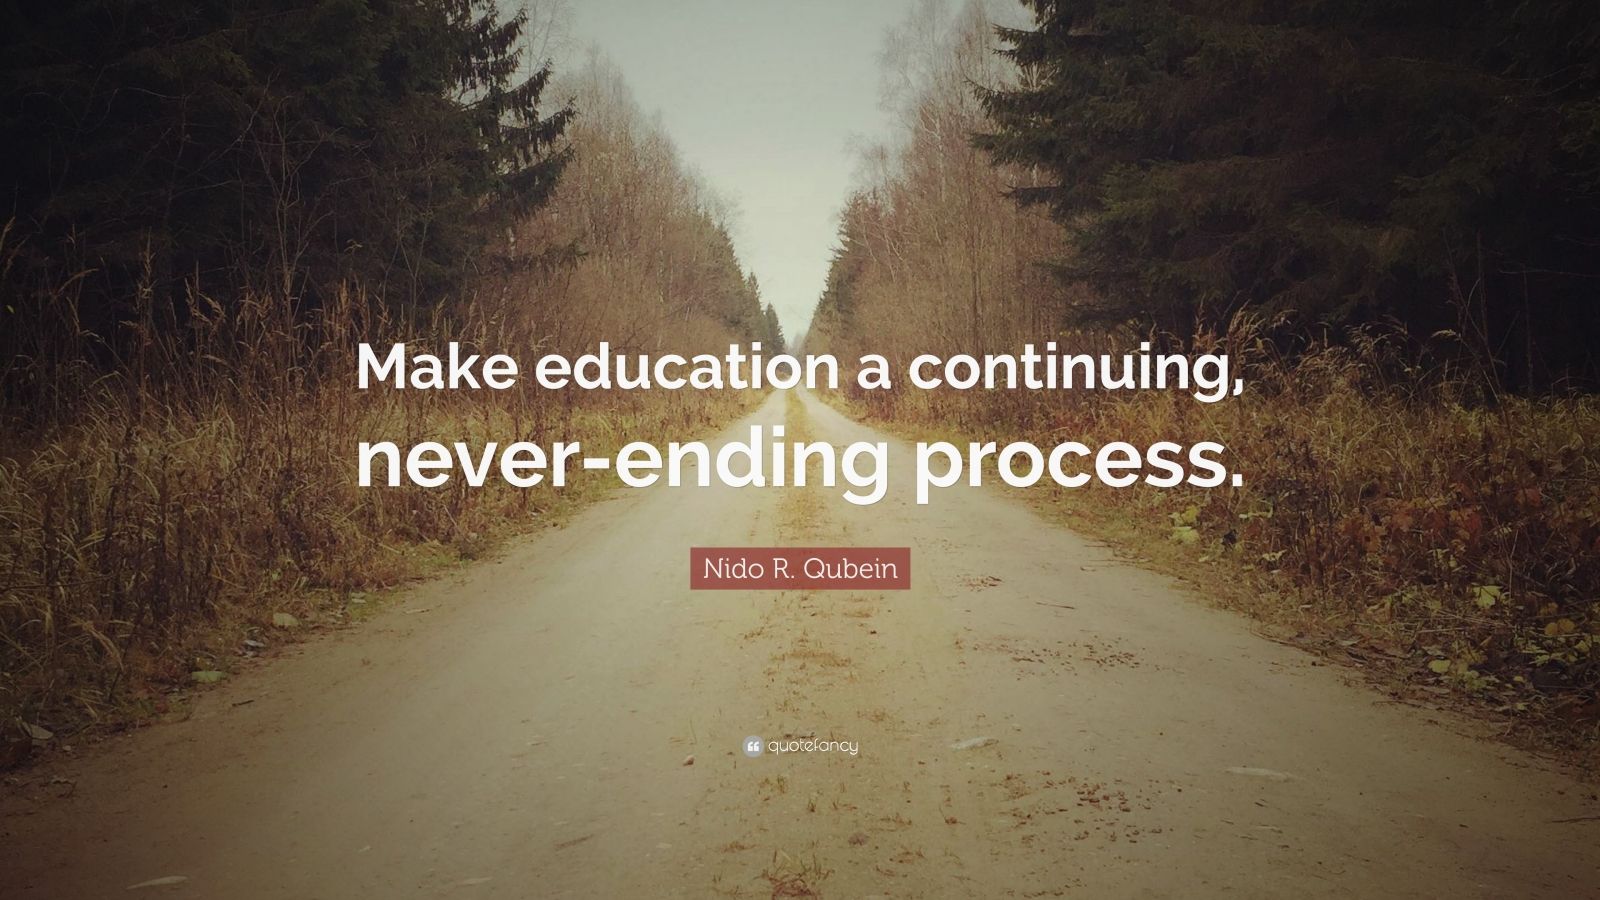 Nido R. Qubein Quote: “Make education a continuing, never-ending